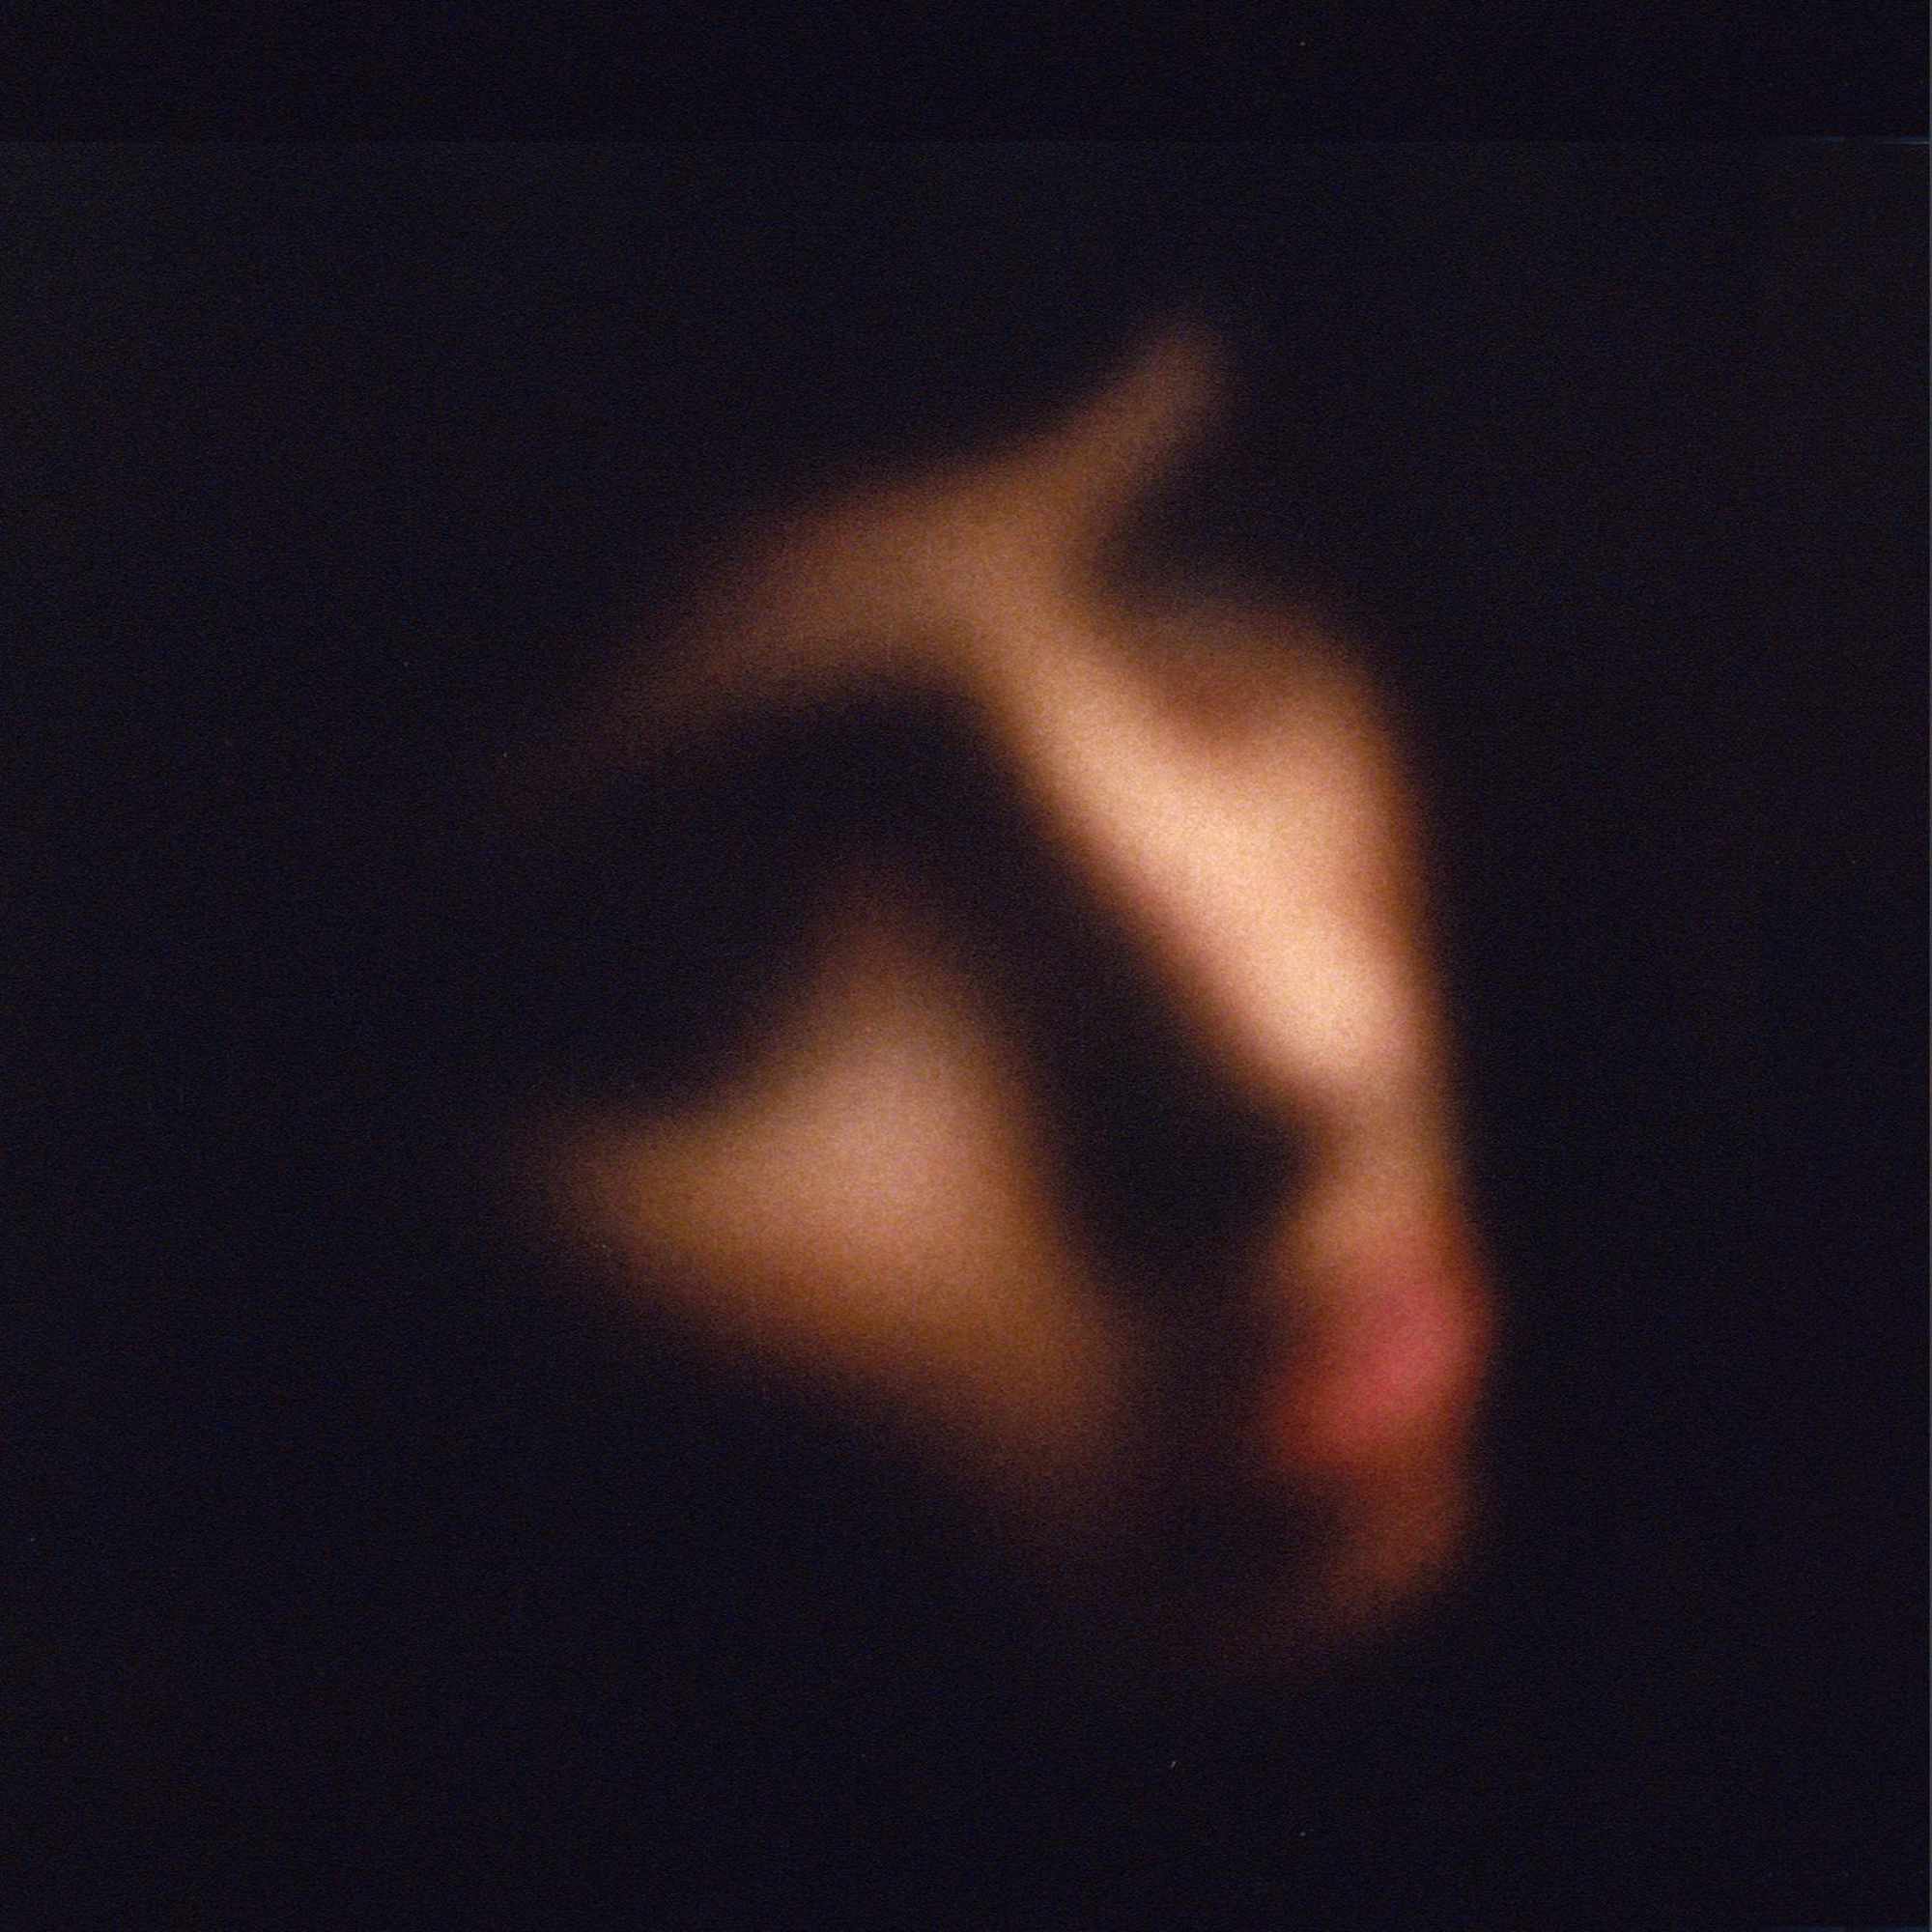 The Act of Being III - Cibachrome Print - 600 x 600mm